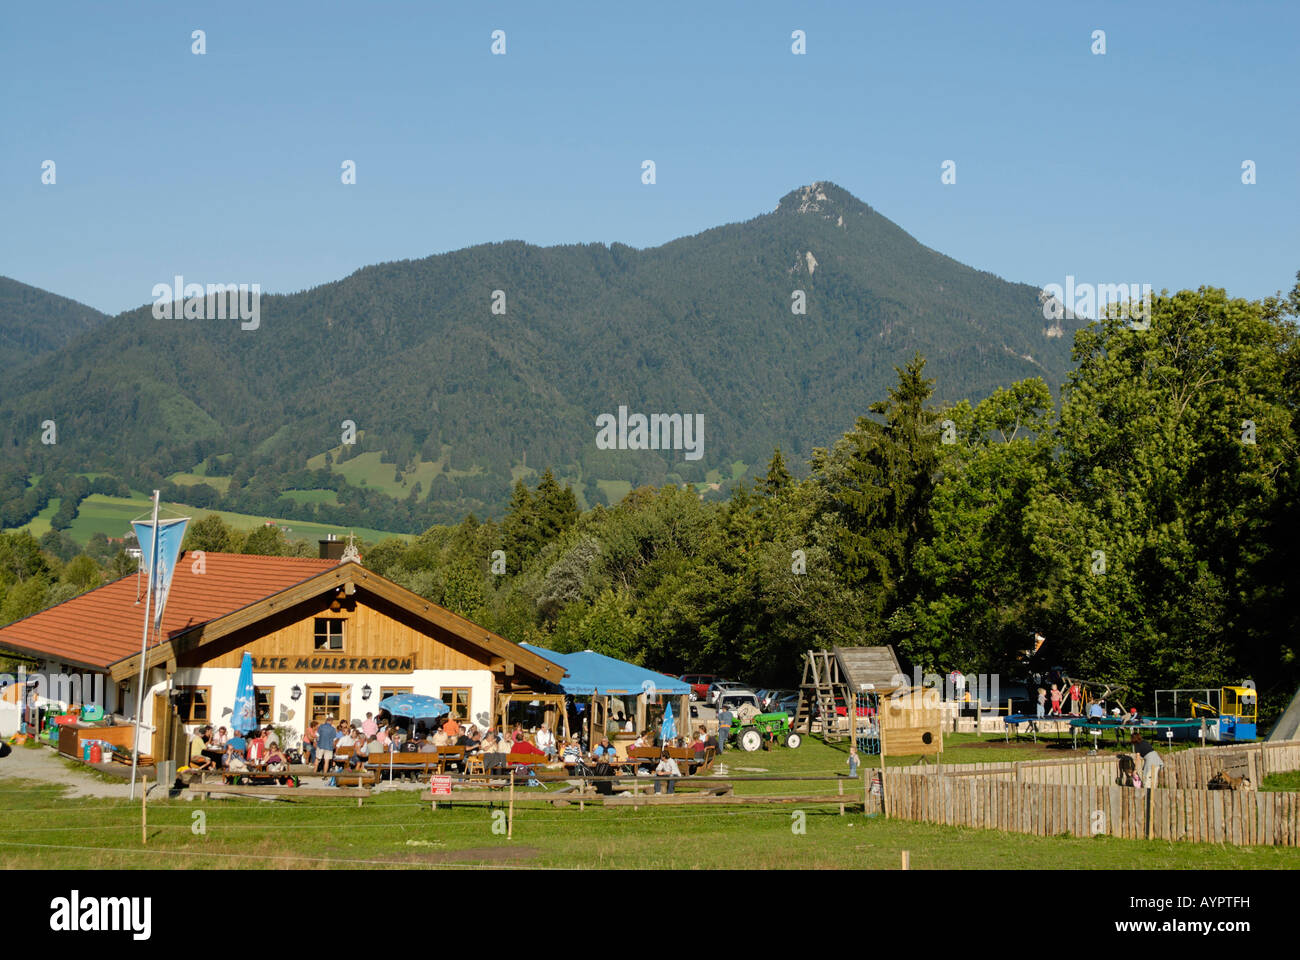 Old mule ranch and mountain inn, Lenggries, Brauneck, Upper Bavaria, Germany Stock Photo